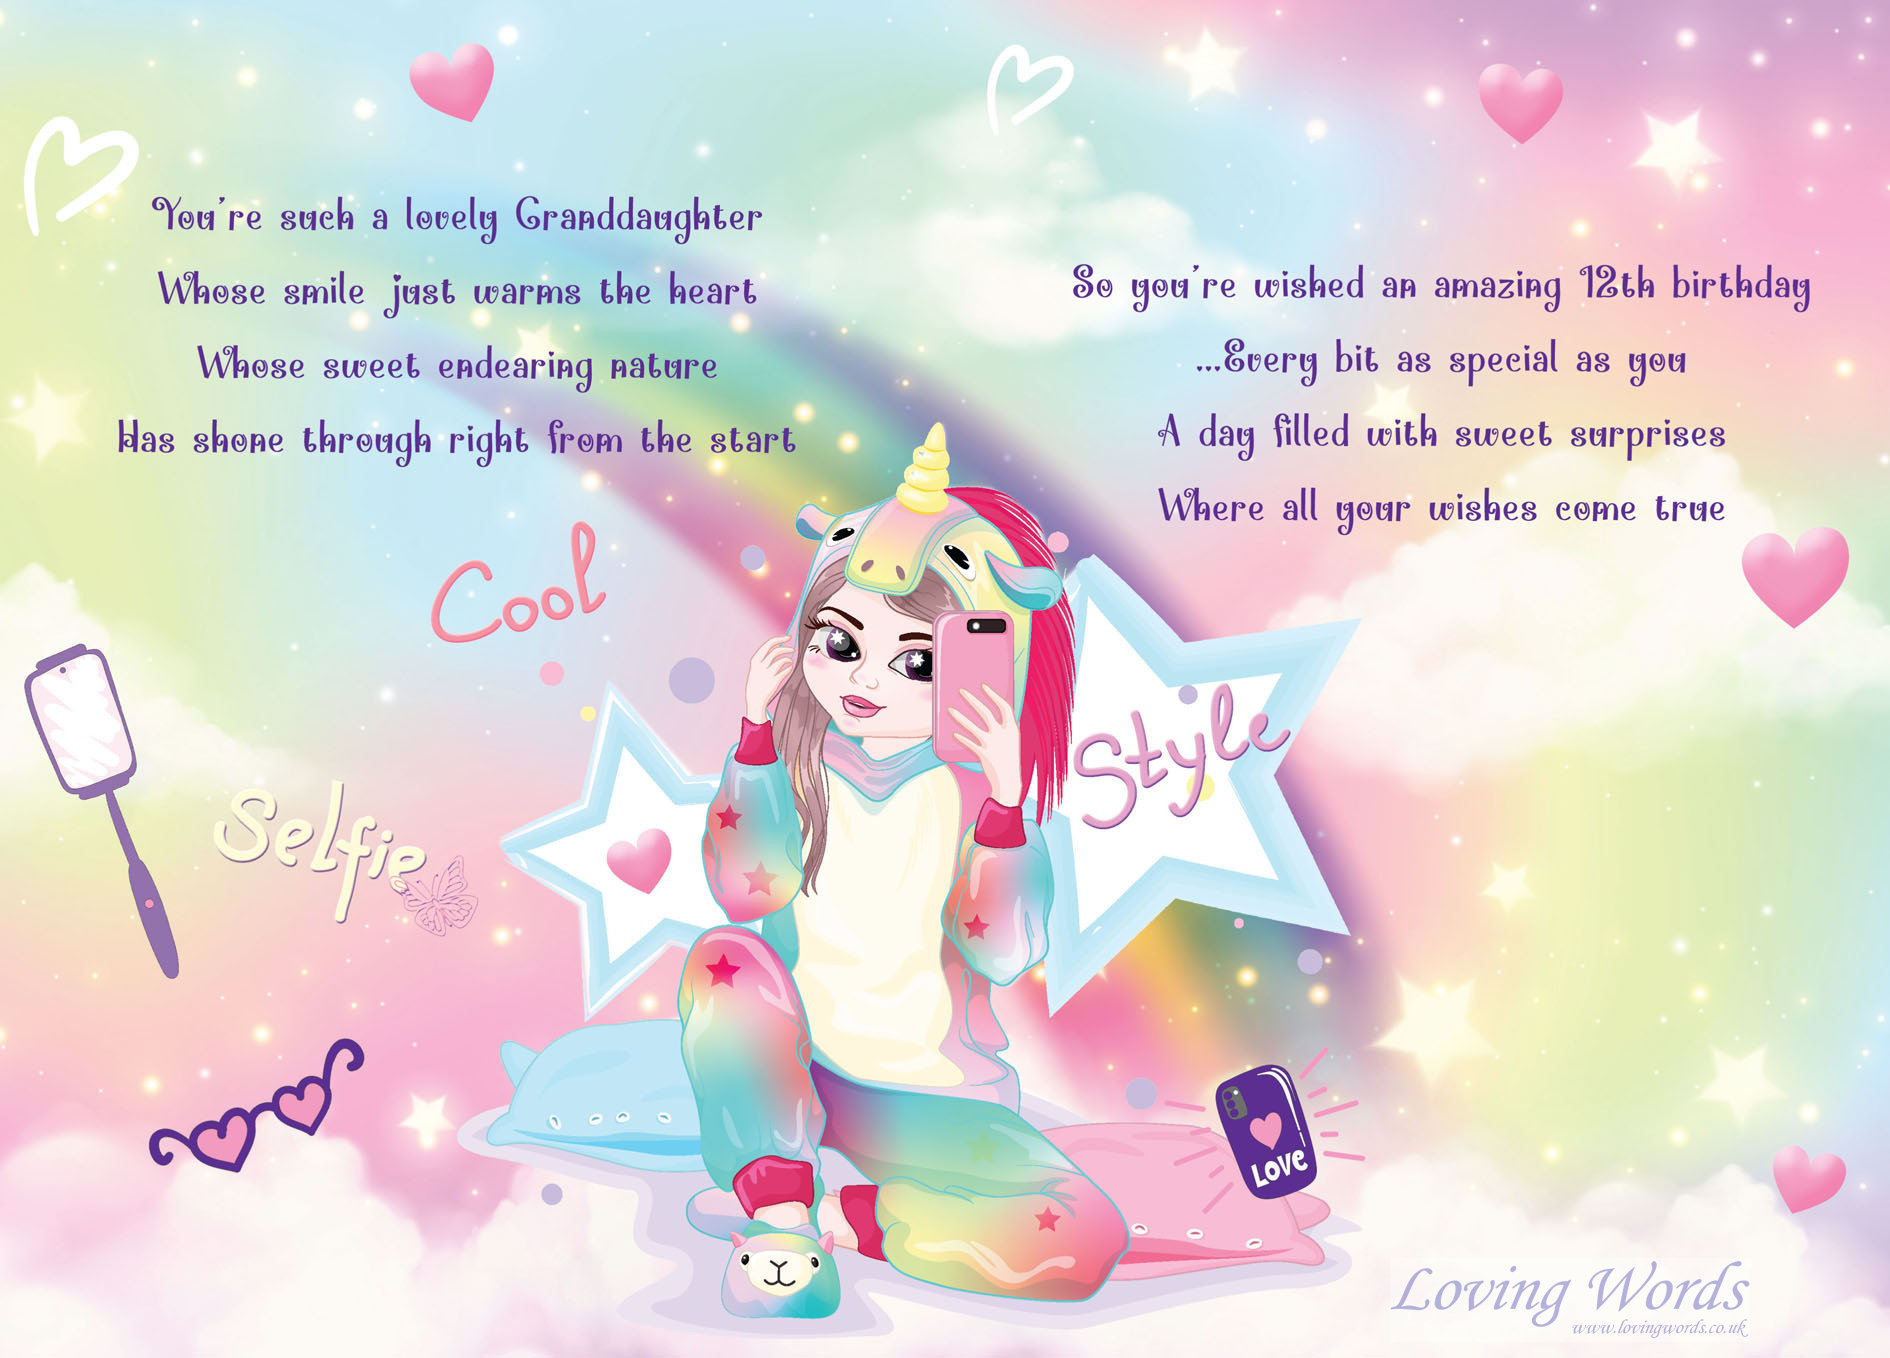 granddaughter-12th-birthday-greeting-cards-by-loving-words